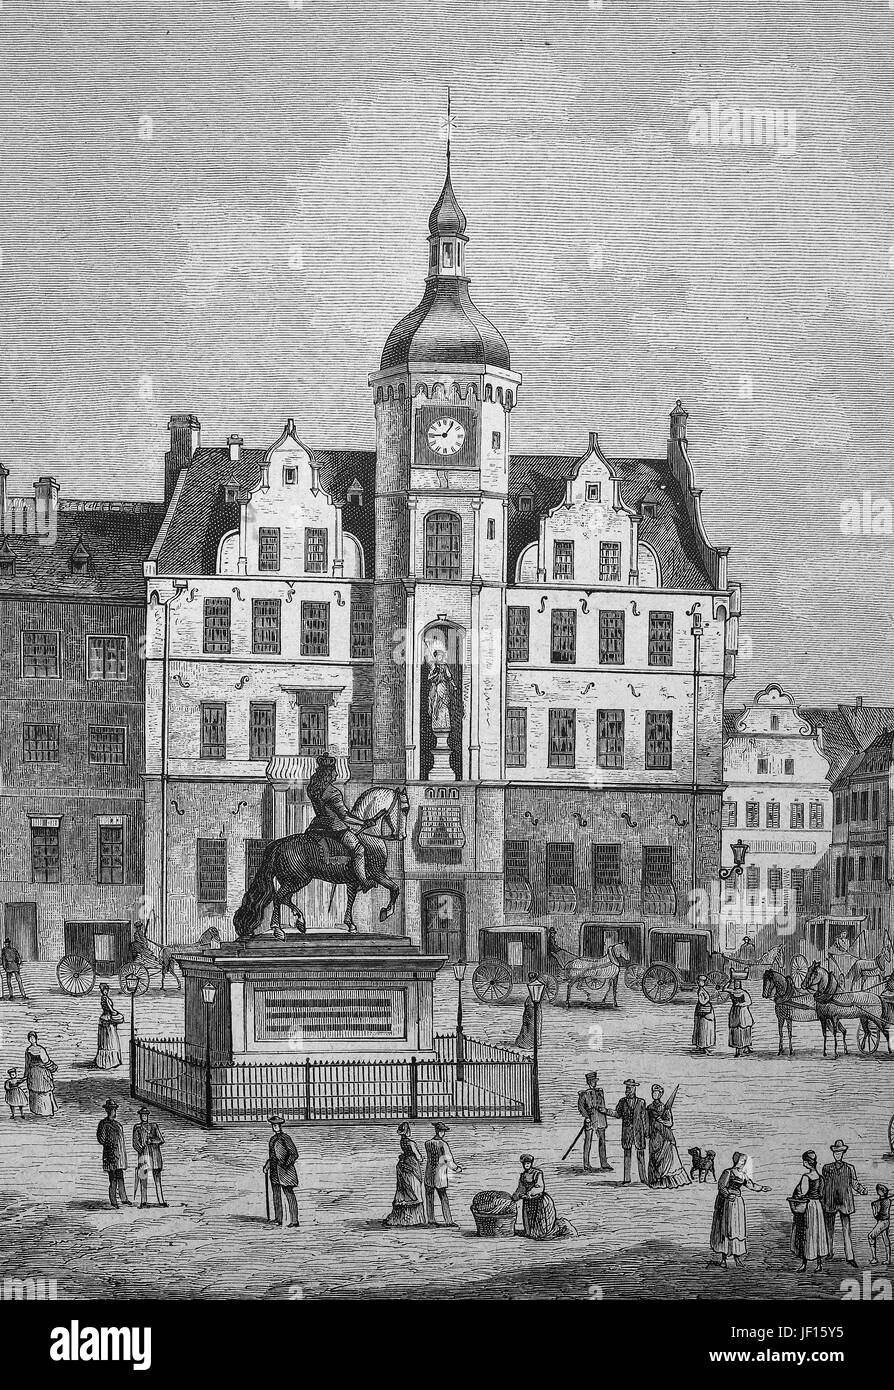 Historical Illustration of the old townhall of Duesseldorf, Düsseldorf, Germany, Digital improved reproduction from an original print from 1888 Stock Photo